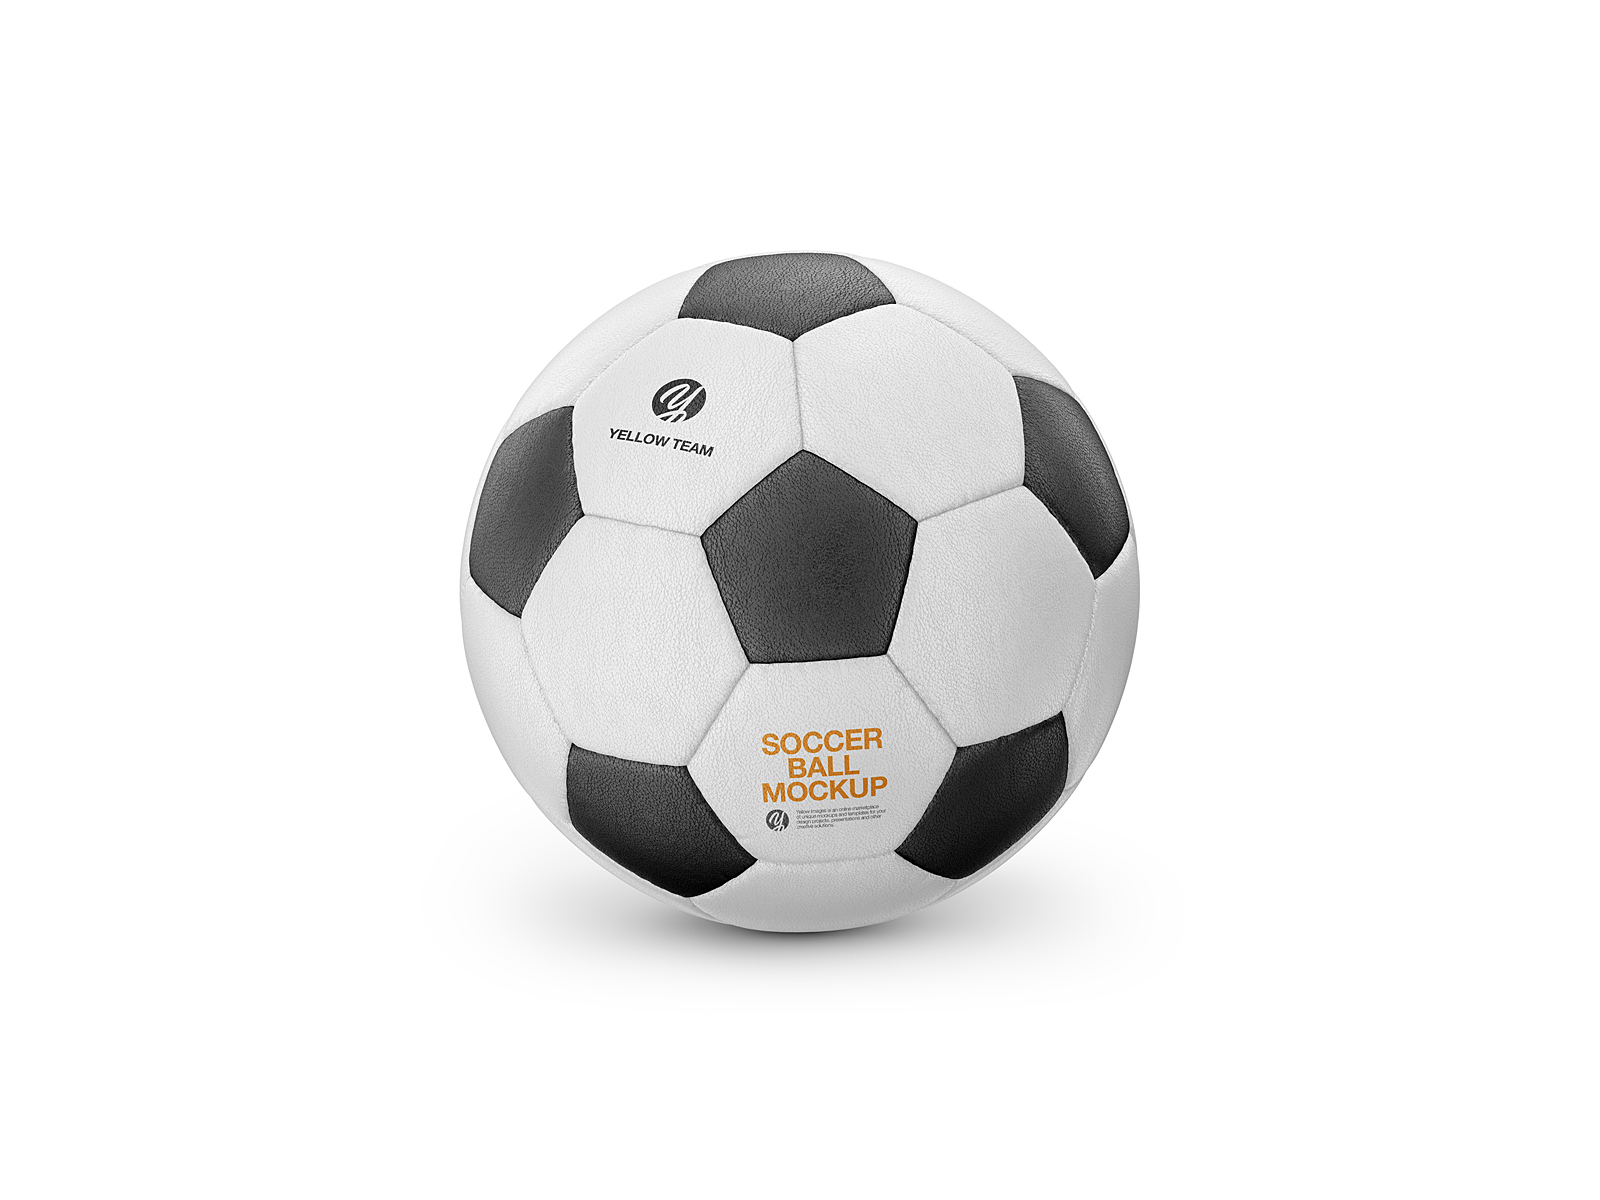 Leather Soccer Ball Mockup by CG Tailor on Dribbble